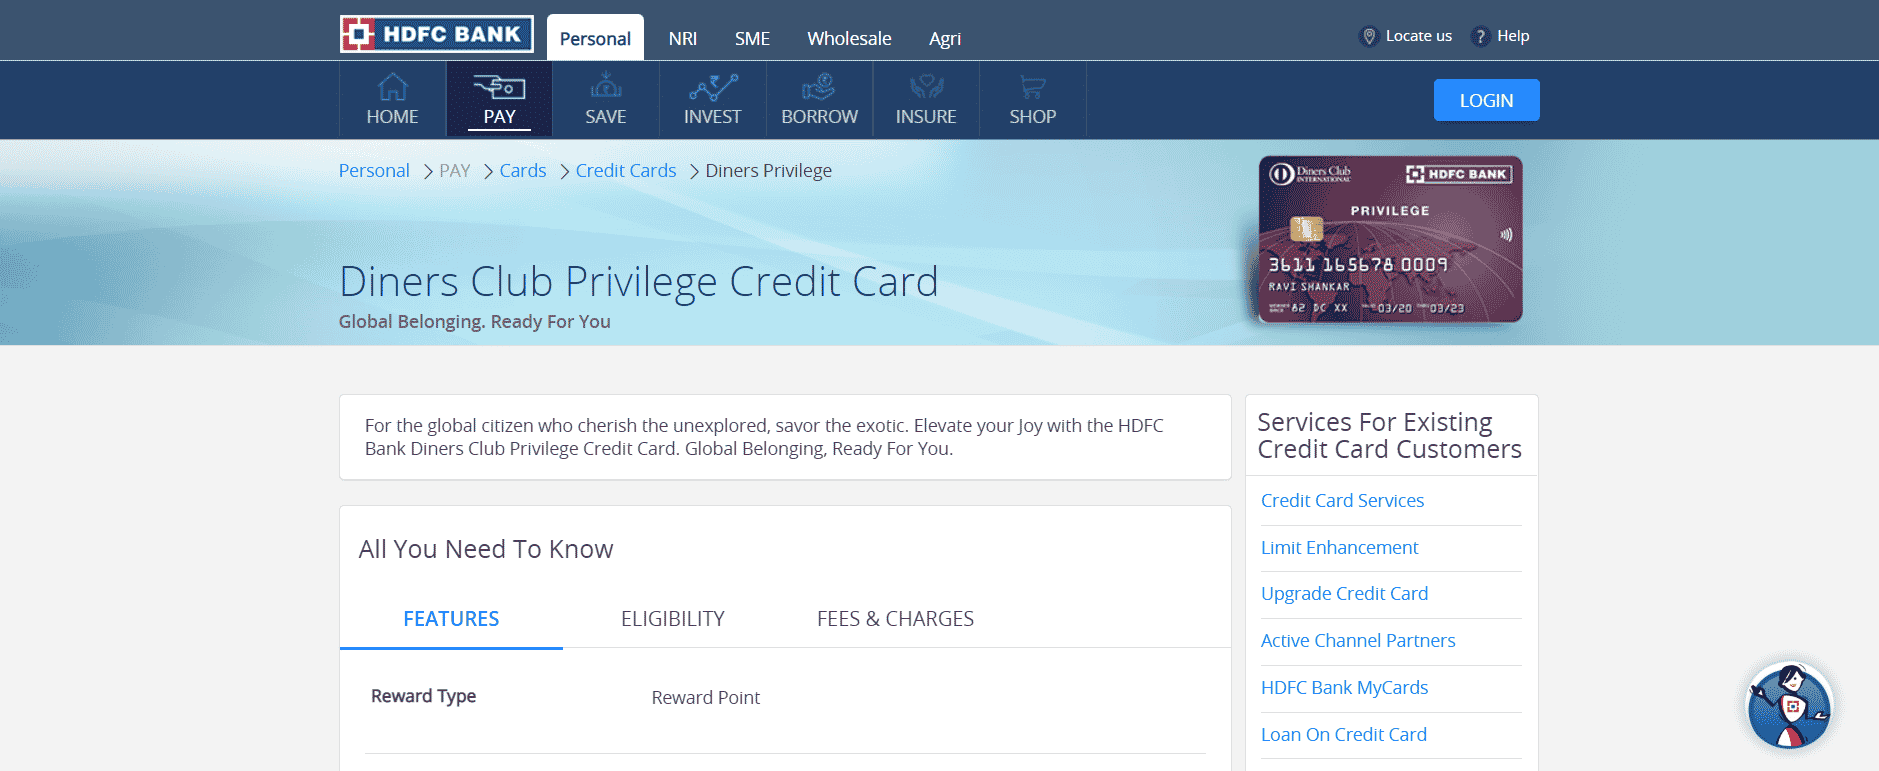 HDFC Bank Diners Club privilege Credit Card | Best Credit Card in India 2022